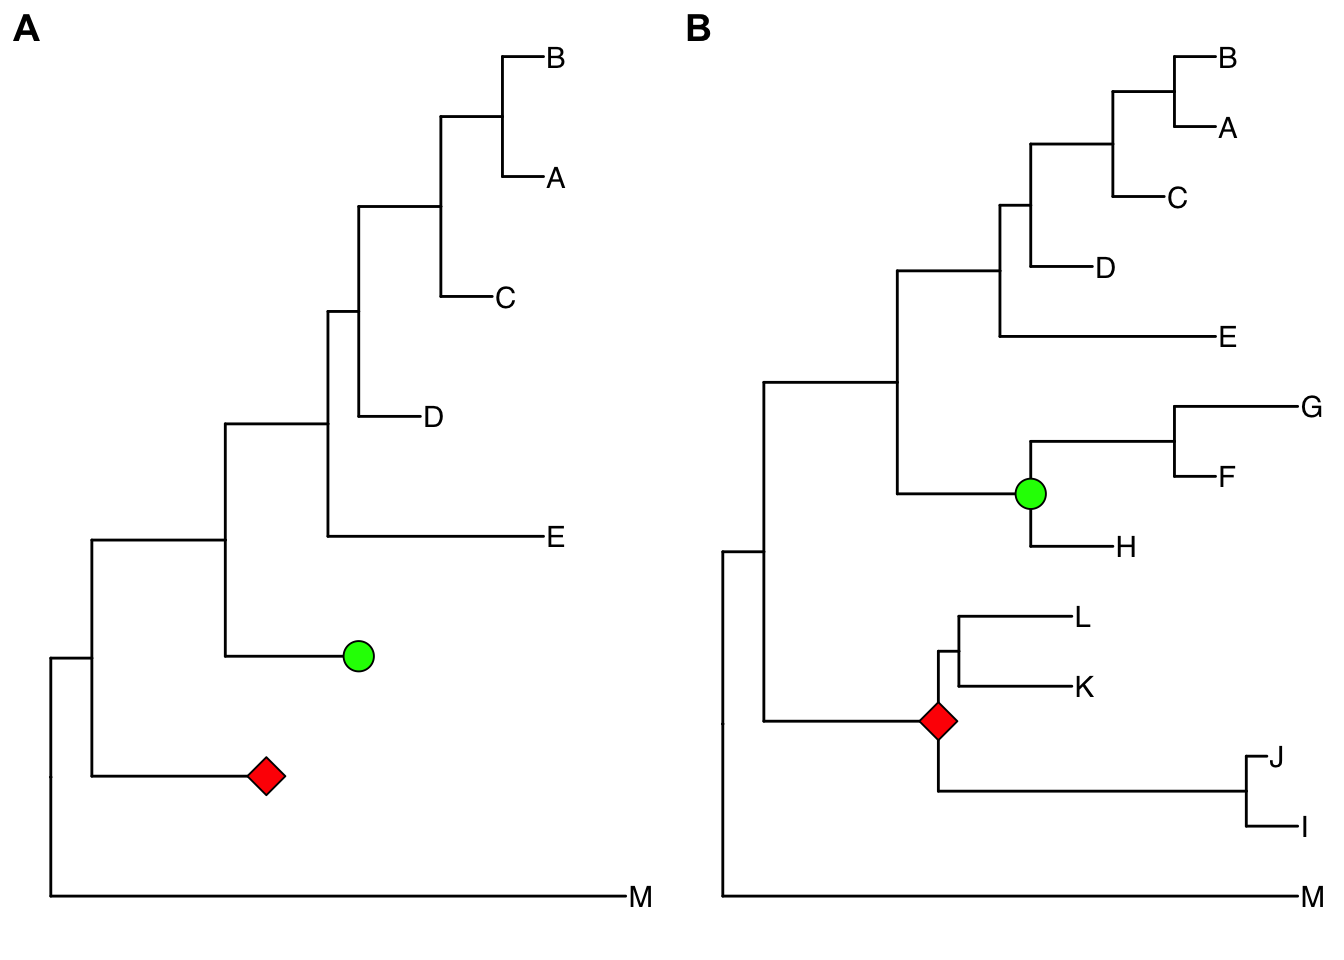 Collapsing selected clades and expanding collapsed clades. Clades can be selected to collapse (A) and the collapsed clades can be expanded back (B) if necessary as ggtree stored all information of species relationships. Green and red symbols were displayed on the tree to indicate the collapsed clades.